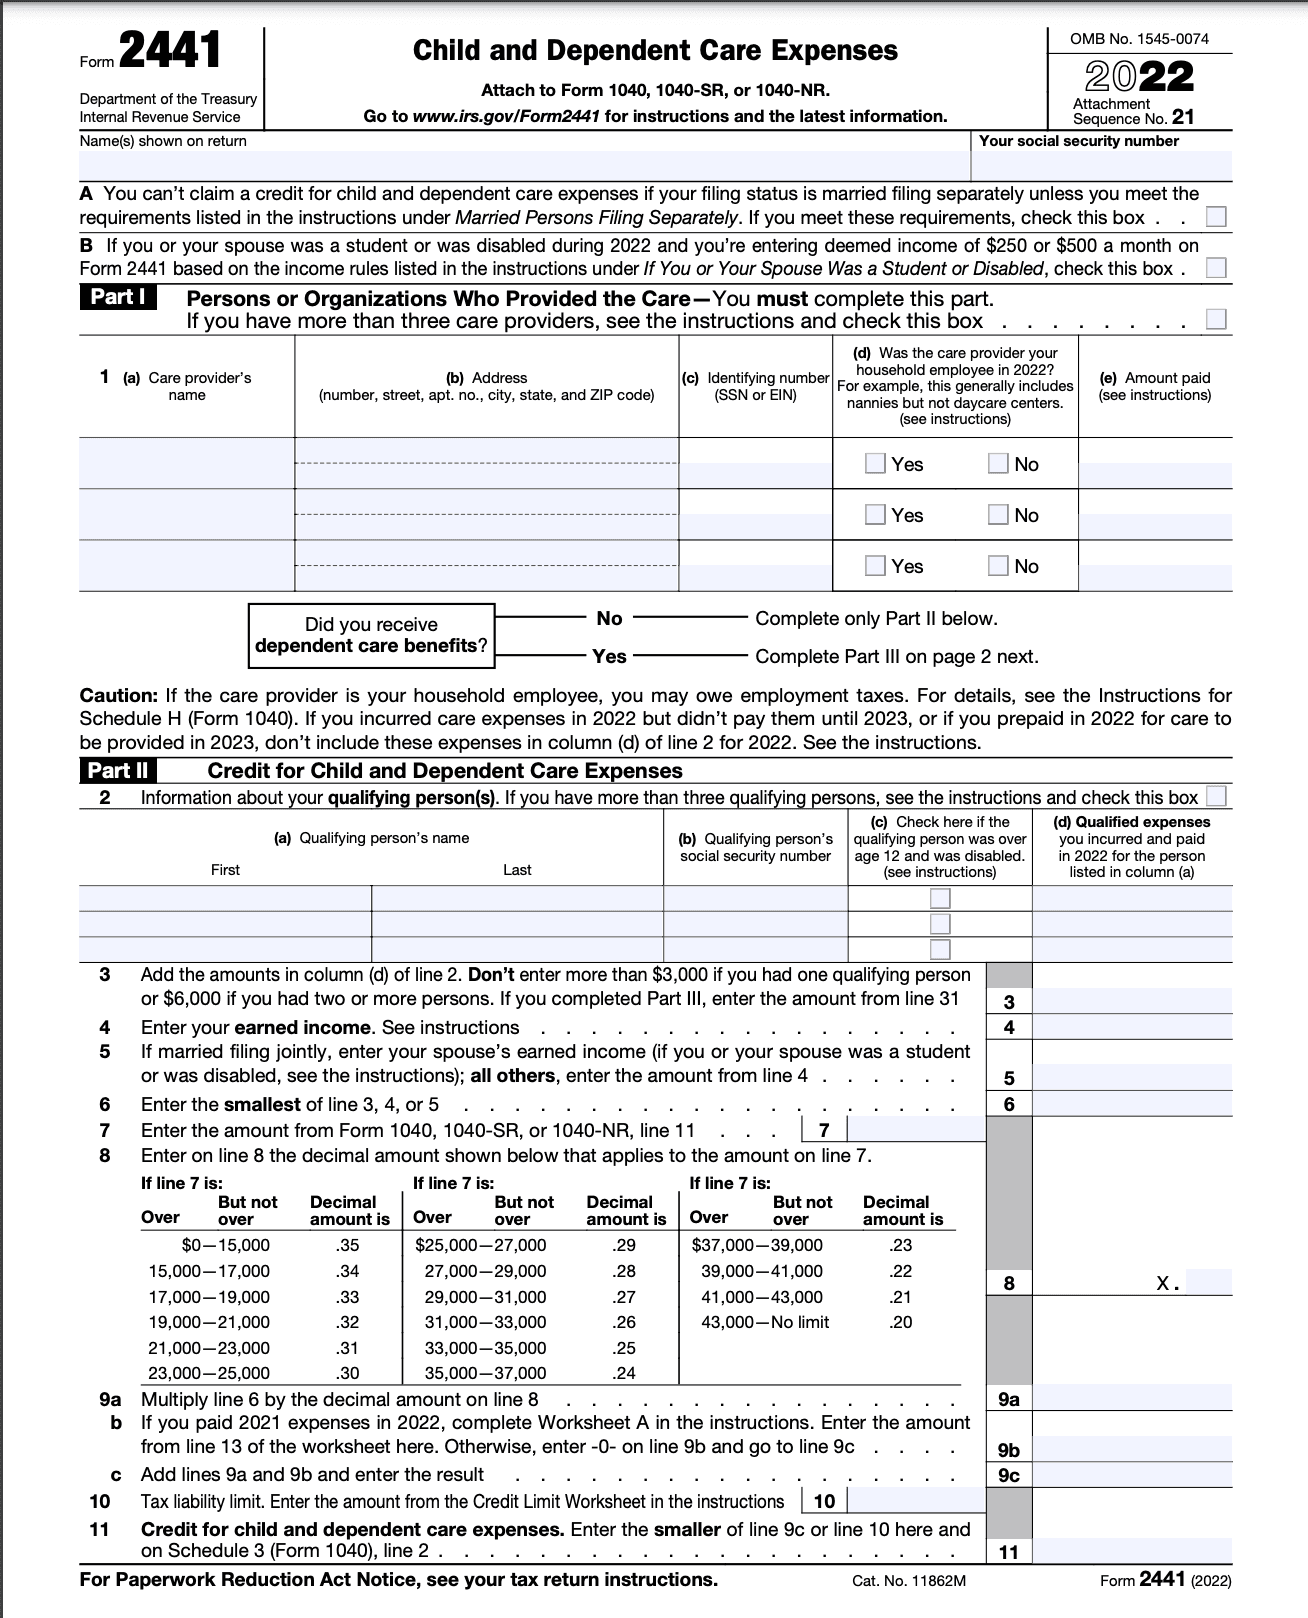 Image of Form 2441 for Child and Care Expenses. Instructions for claiming credit for dependent care expenses on tax return. No mention of self-employed, 1099, freelancer, or taxes.